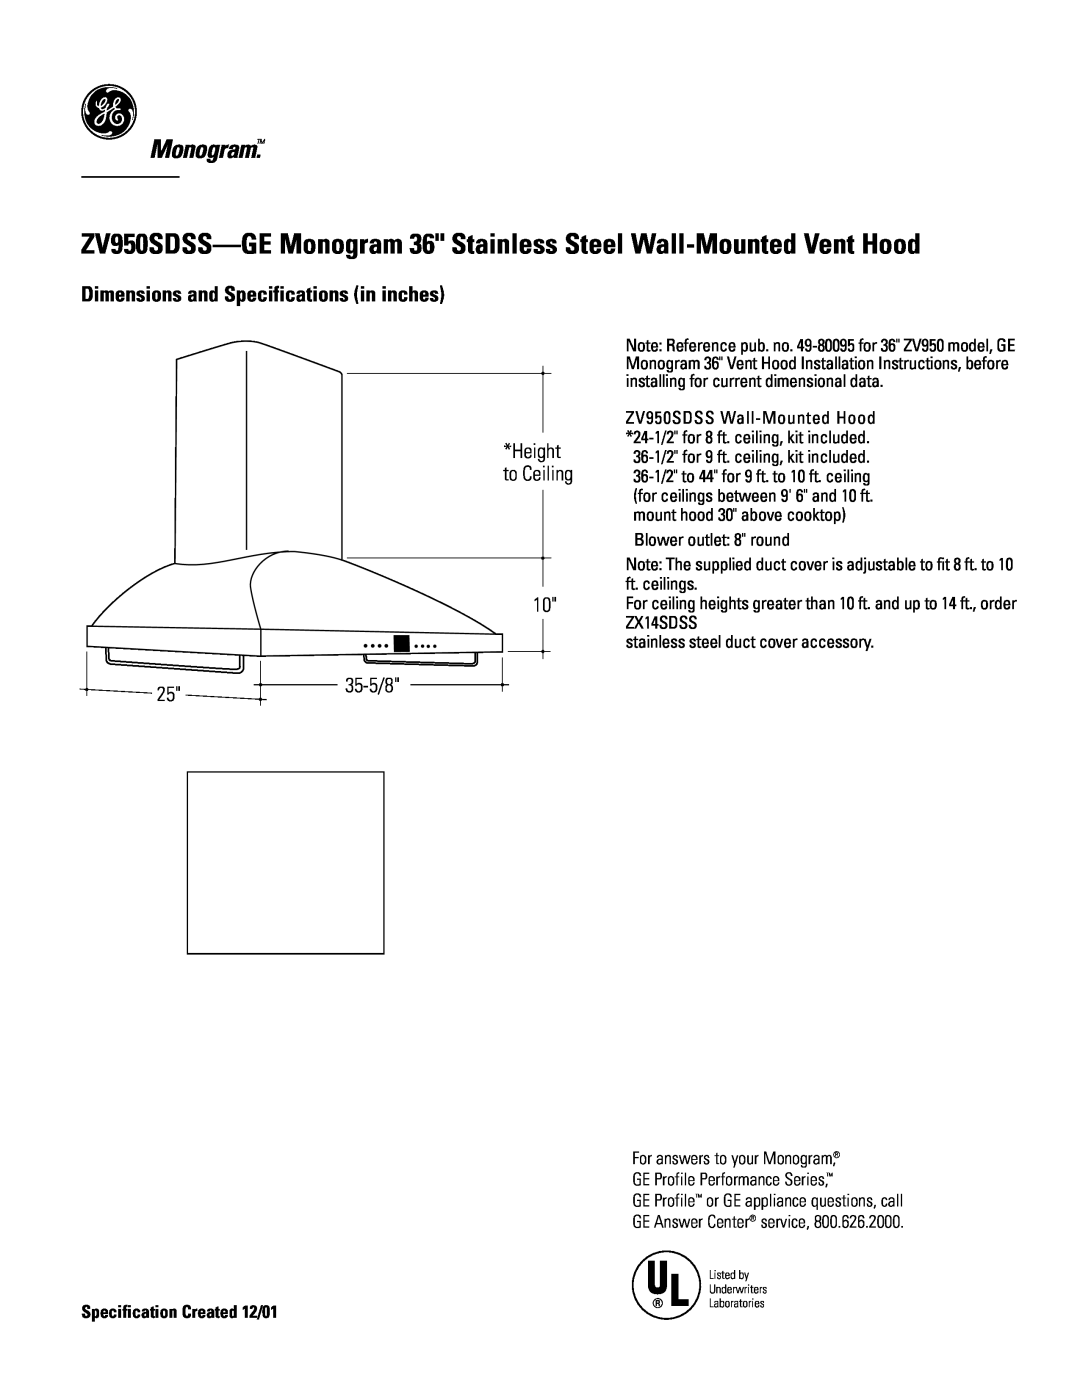 GE Monogram ZV950SDSS dimensions Monogram, Dimensions and Specifications in inches, 35-5/8, Height to Ceiling 